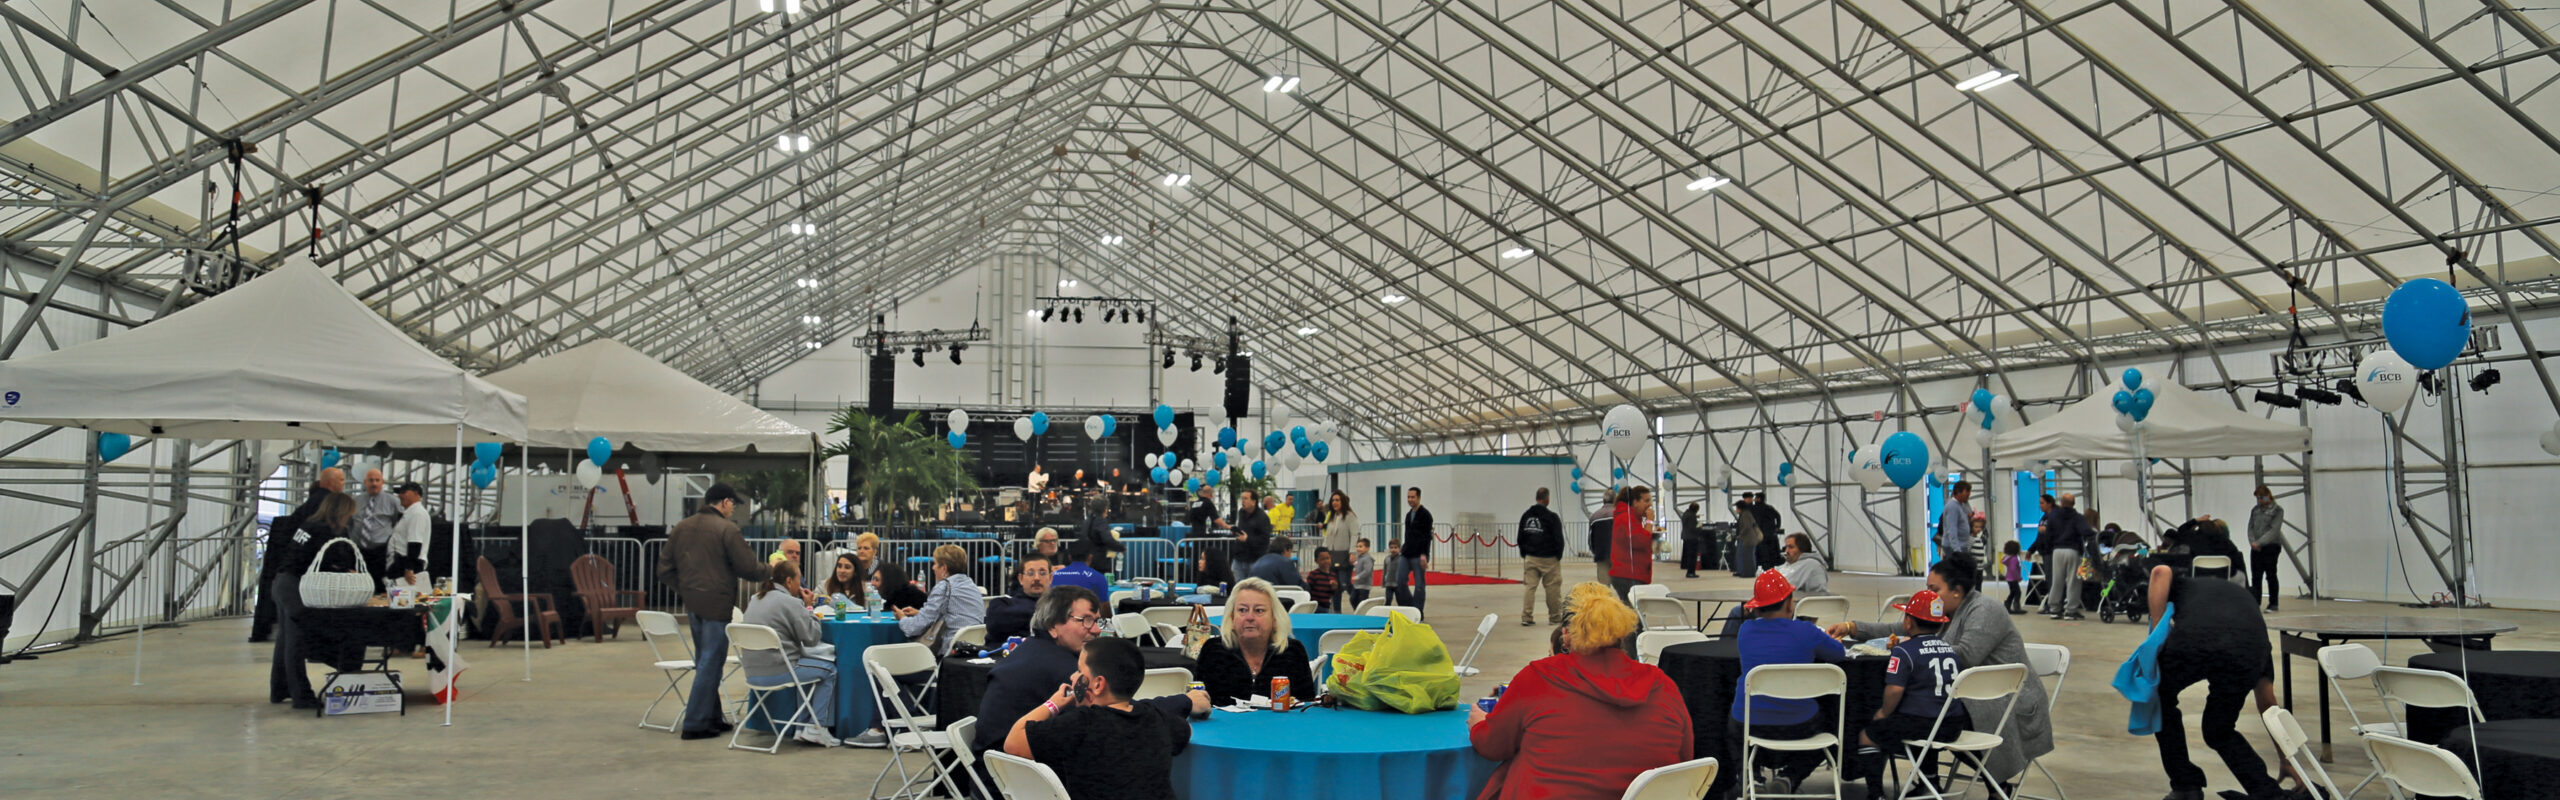 Fabric Structure Event Space